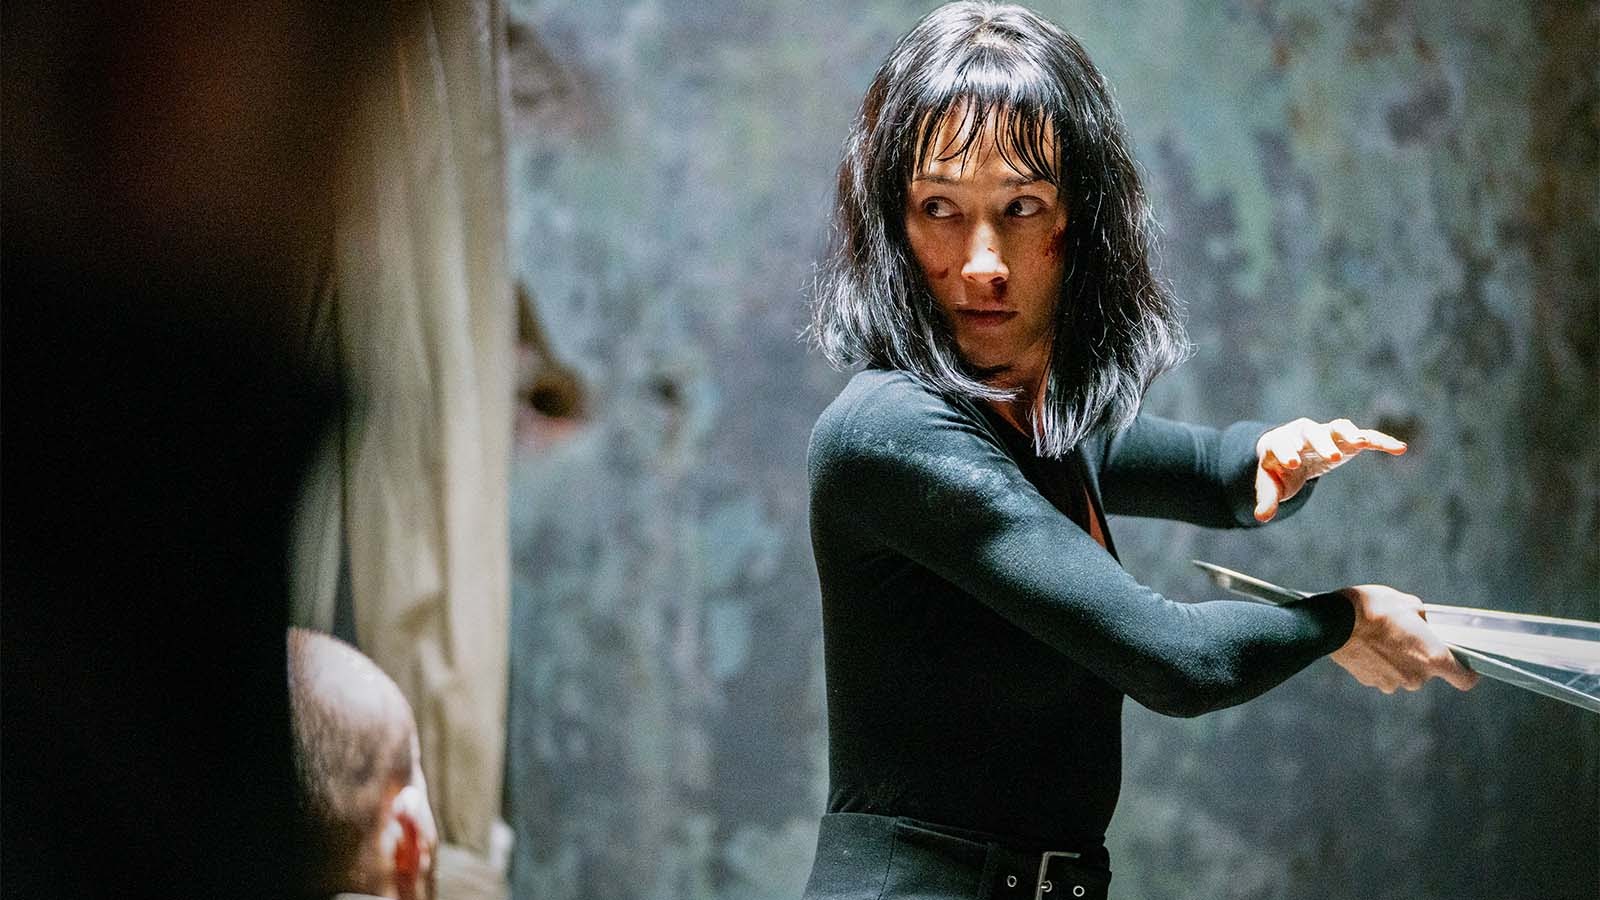 Maggie Q in action as Anna. 